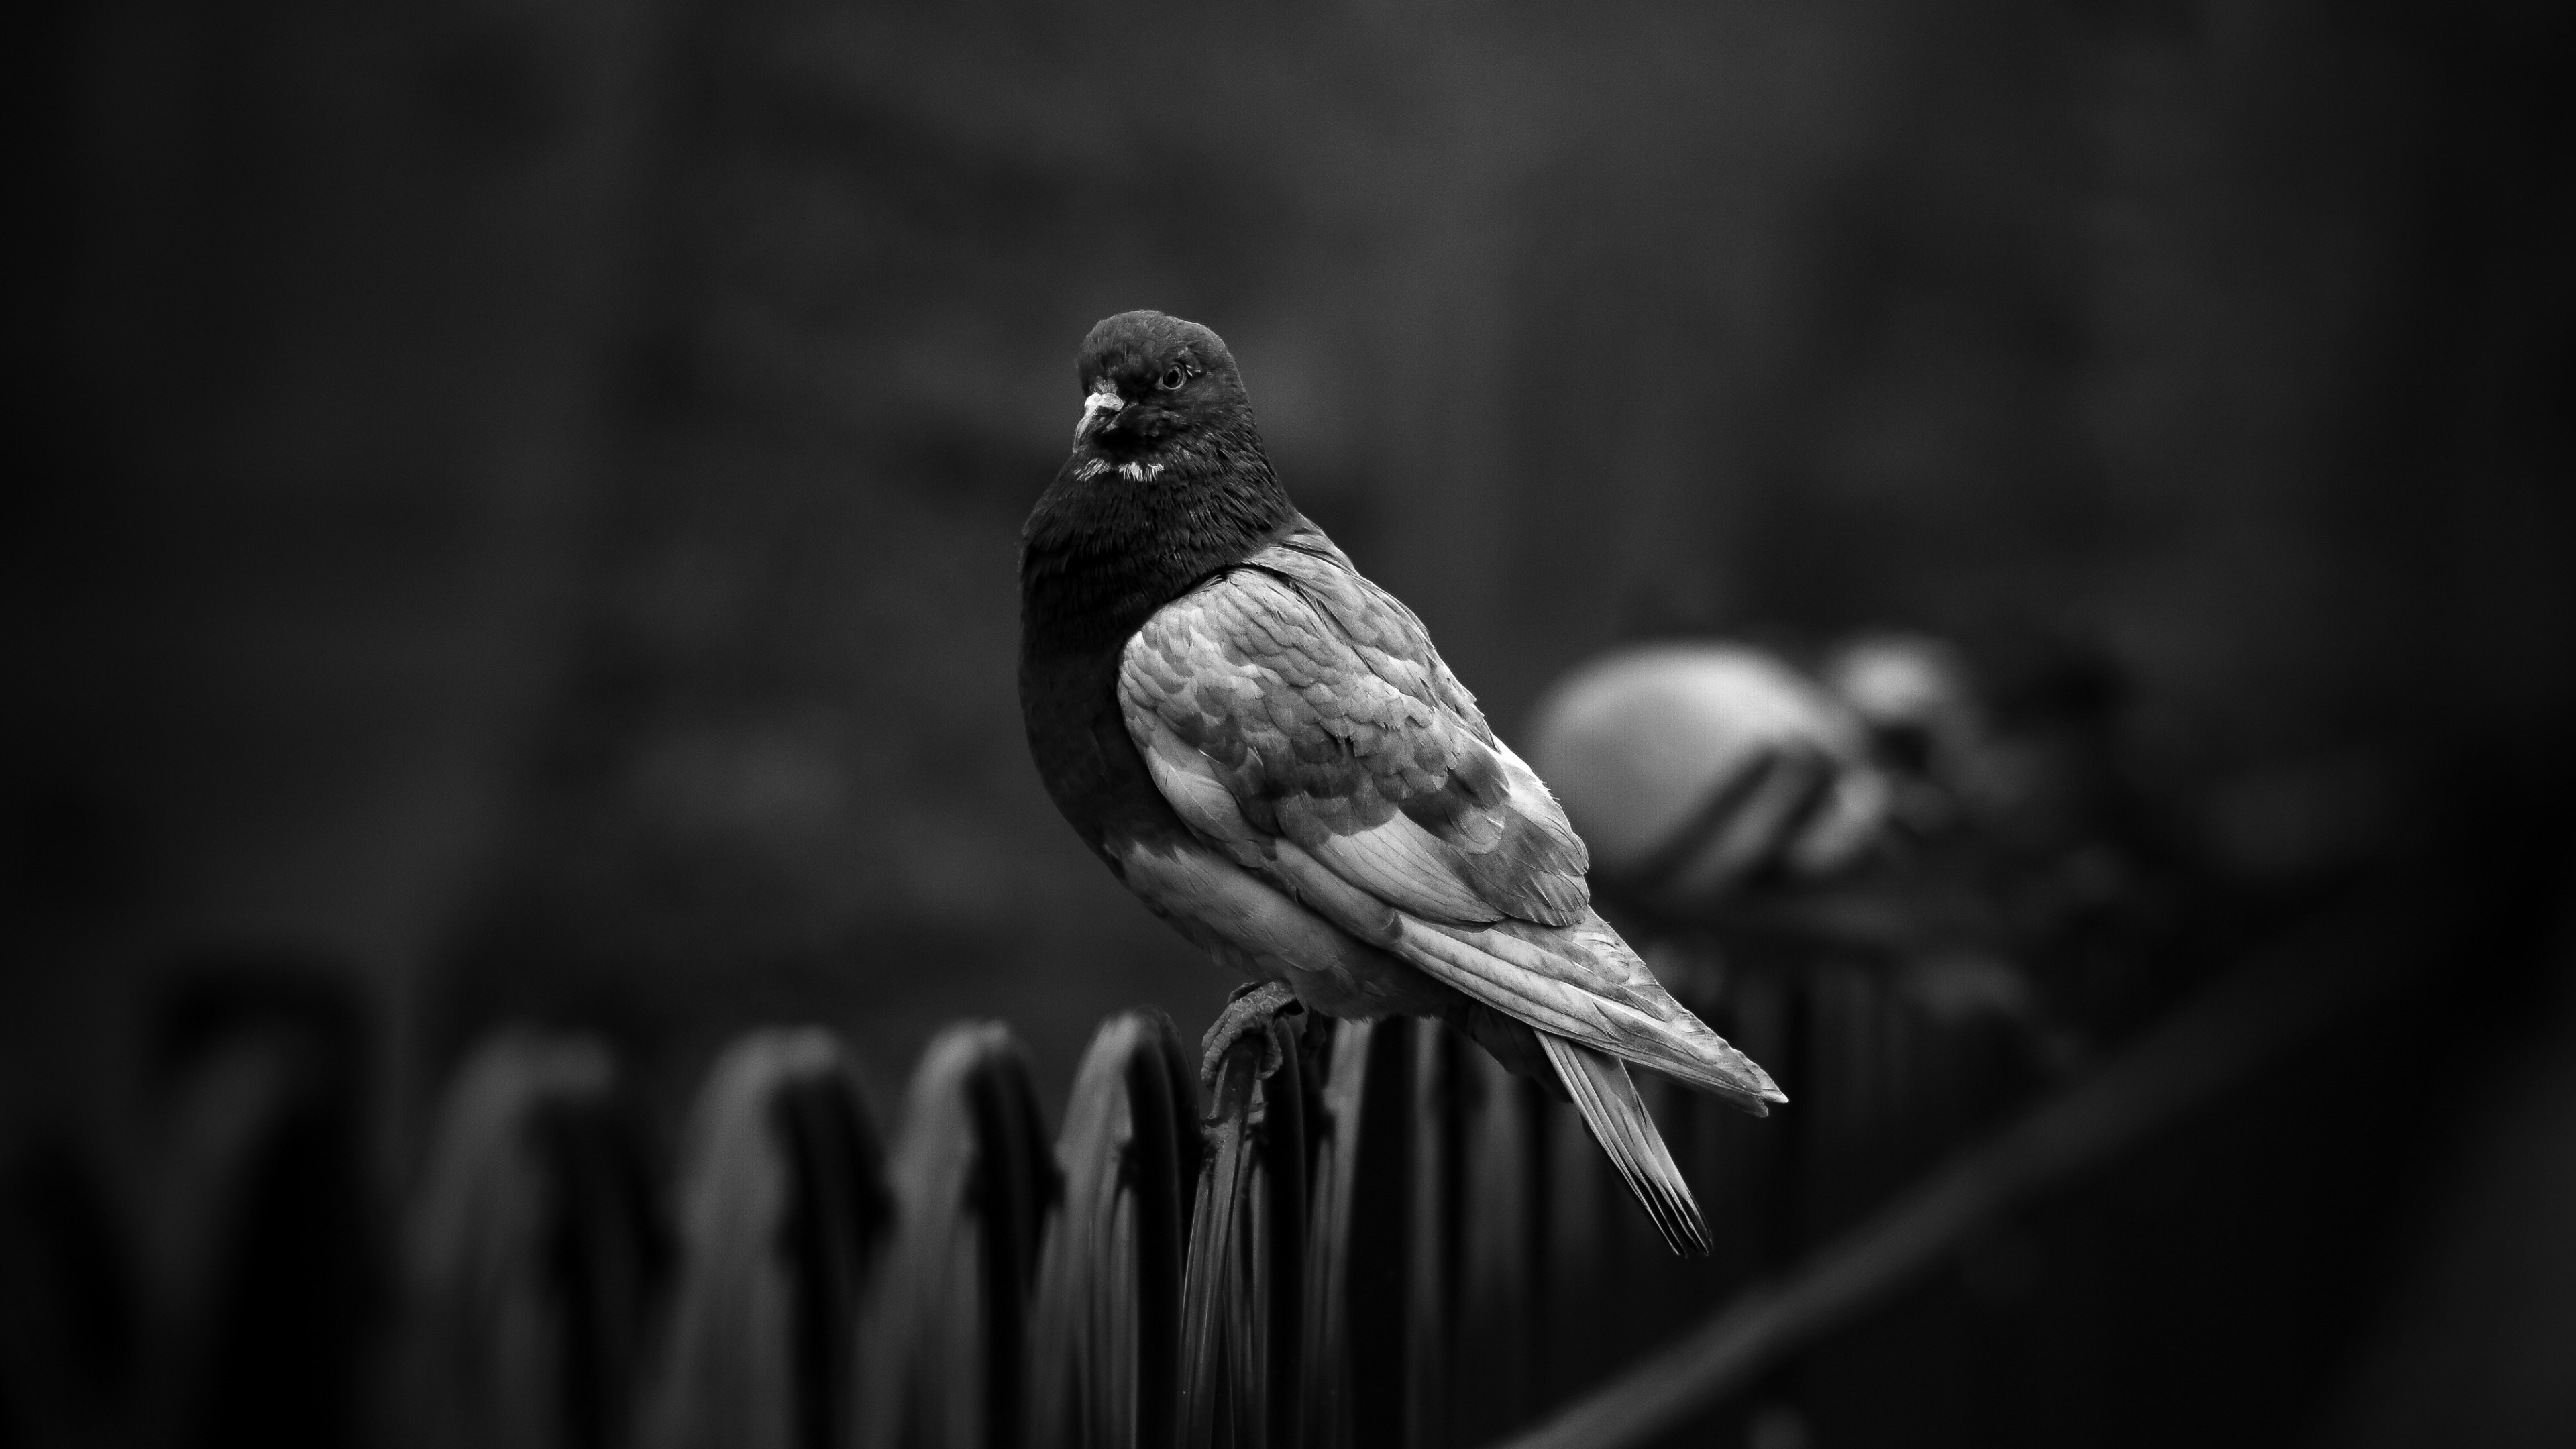 Grayscale Photo of a Bird on a Wooden Fence. Wallpaper in 3840x2160 Resolution